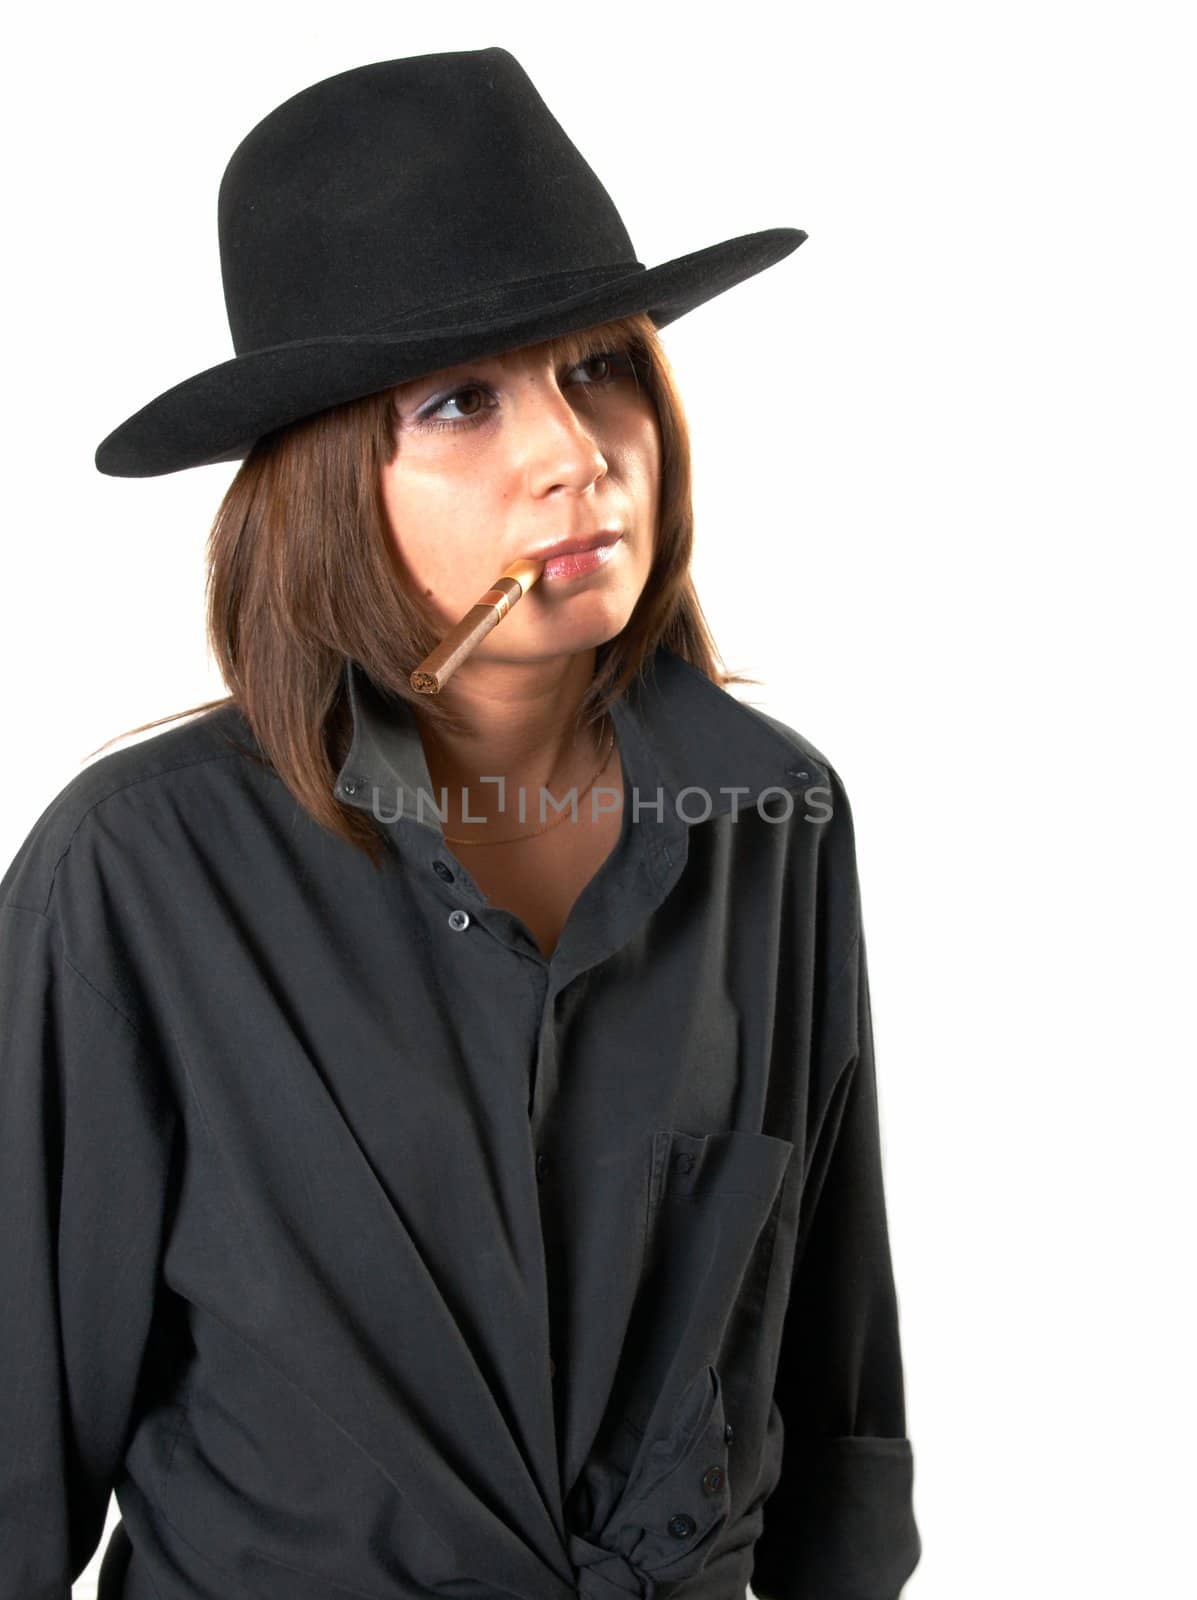 girl in a black shirt and a cowboy's hat  by holligan78